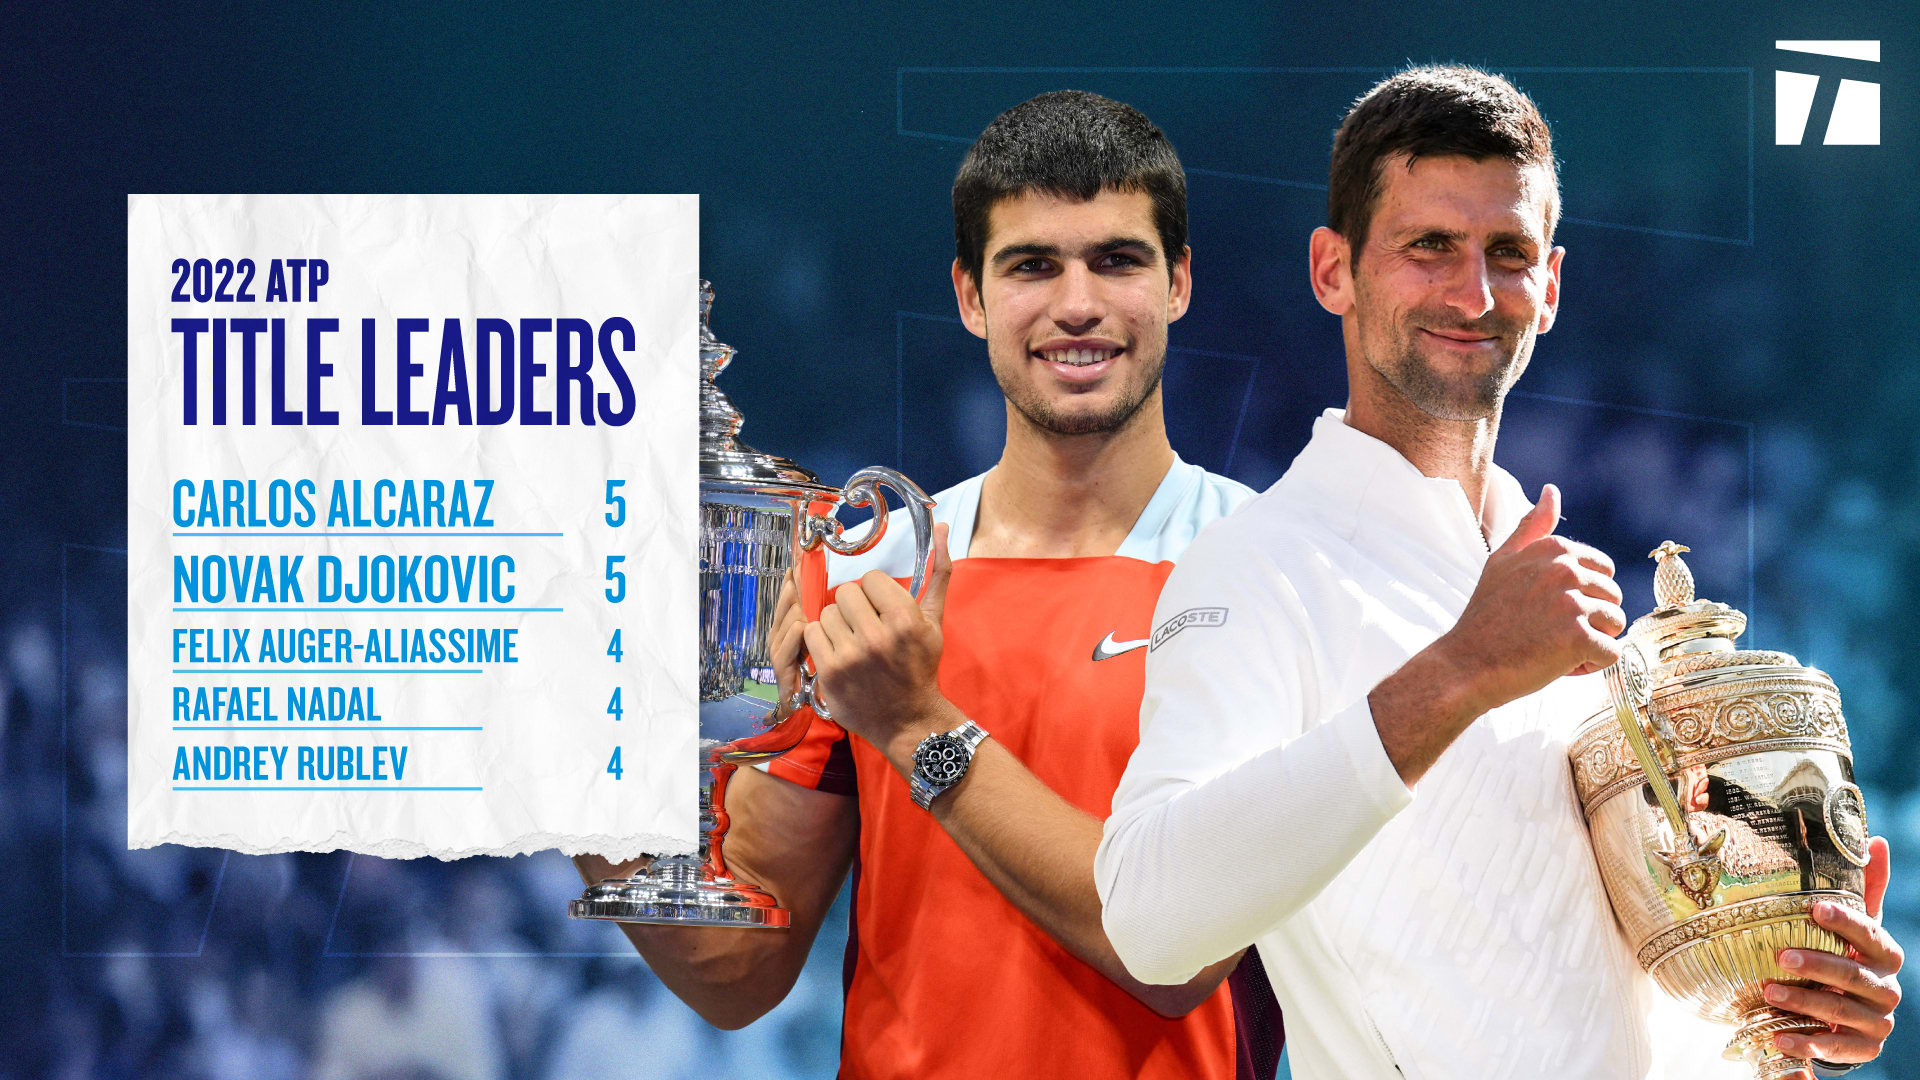 Most Titles In 2022 Djokovic and Alcaraz lead the men with five each, Swiatek dominates the womens list